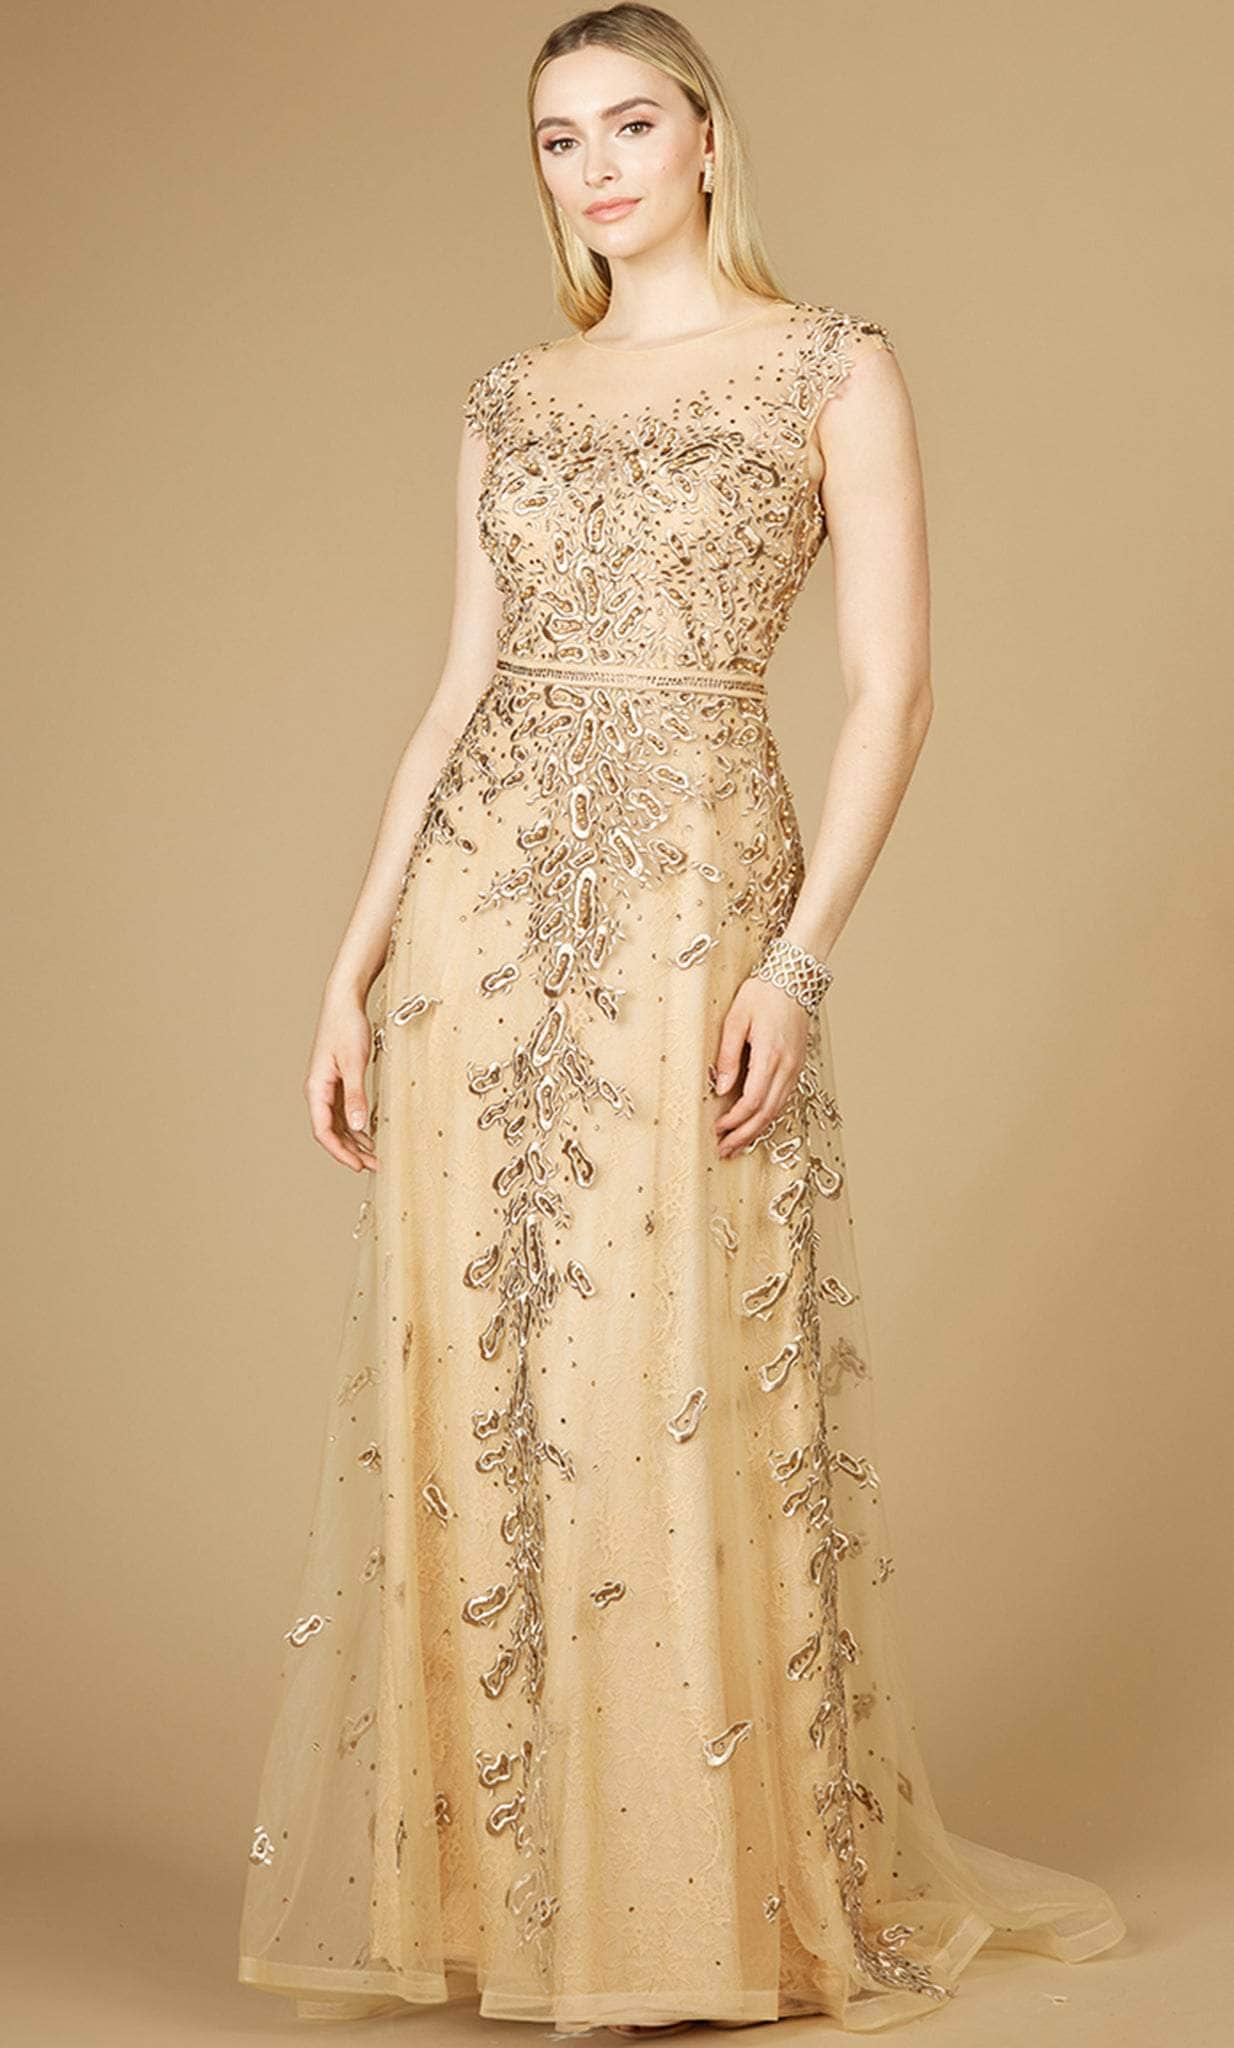 Image of Lara Dresses 29250 - Embroidered Cap Sleeve Evening Gown